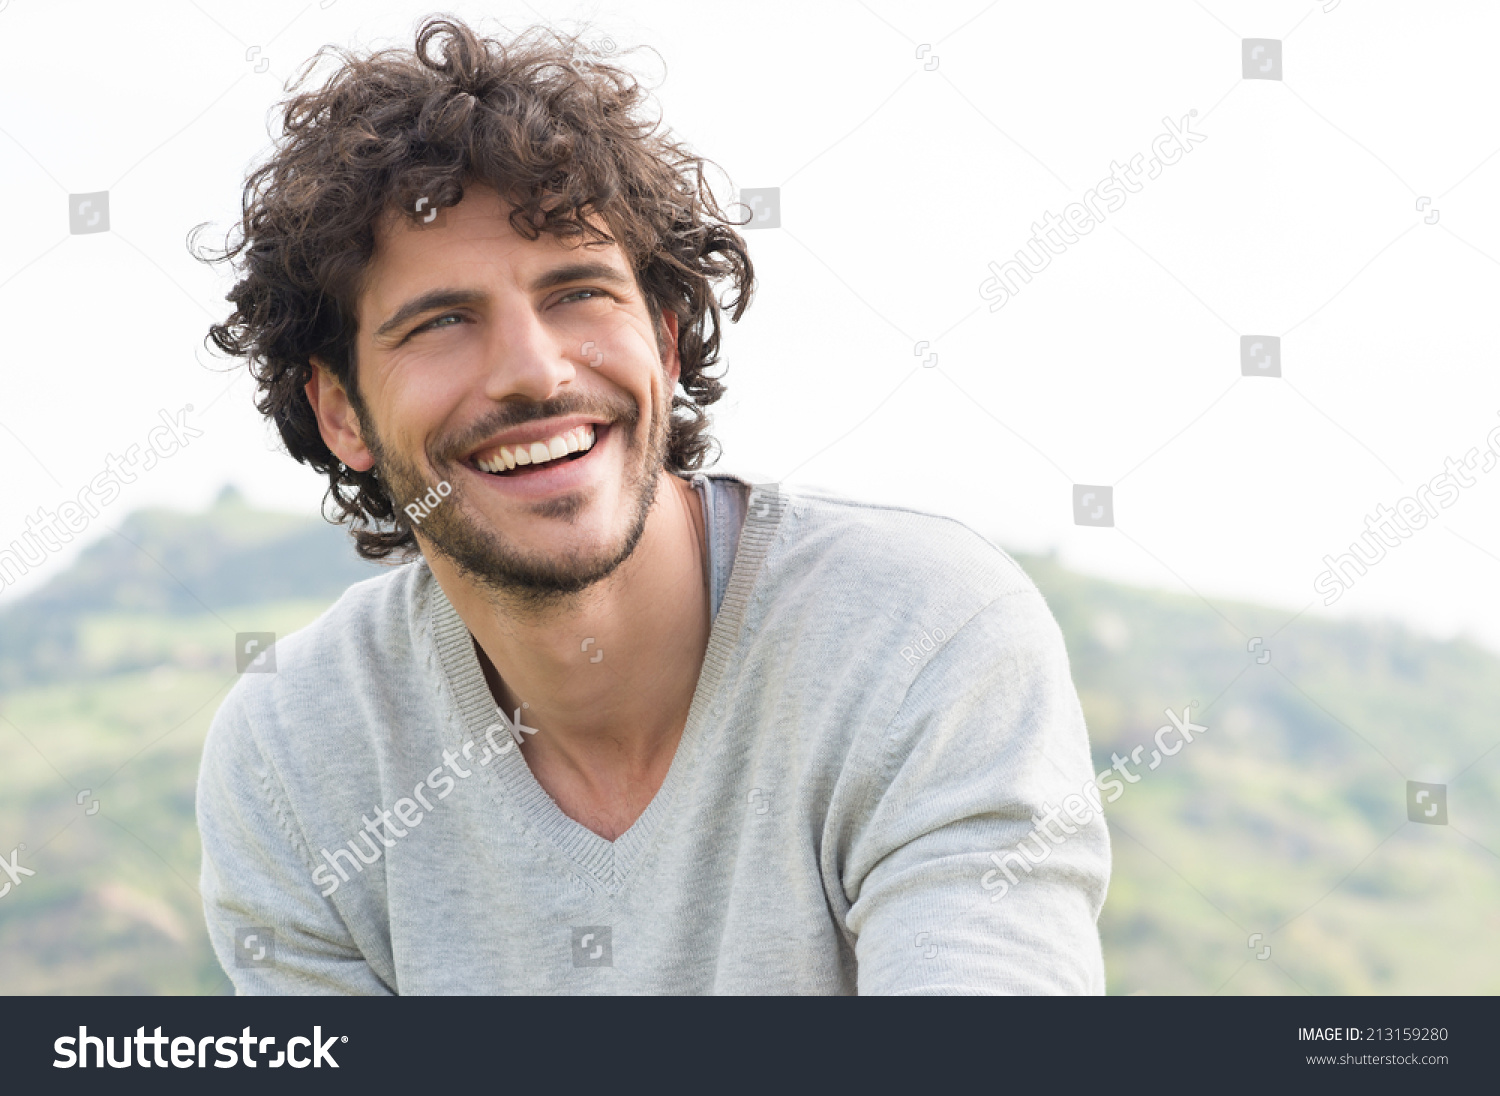 Portrait Of Young Handsome Man Smiling Outdoor #213159280